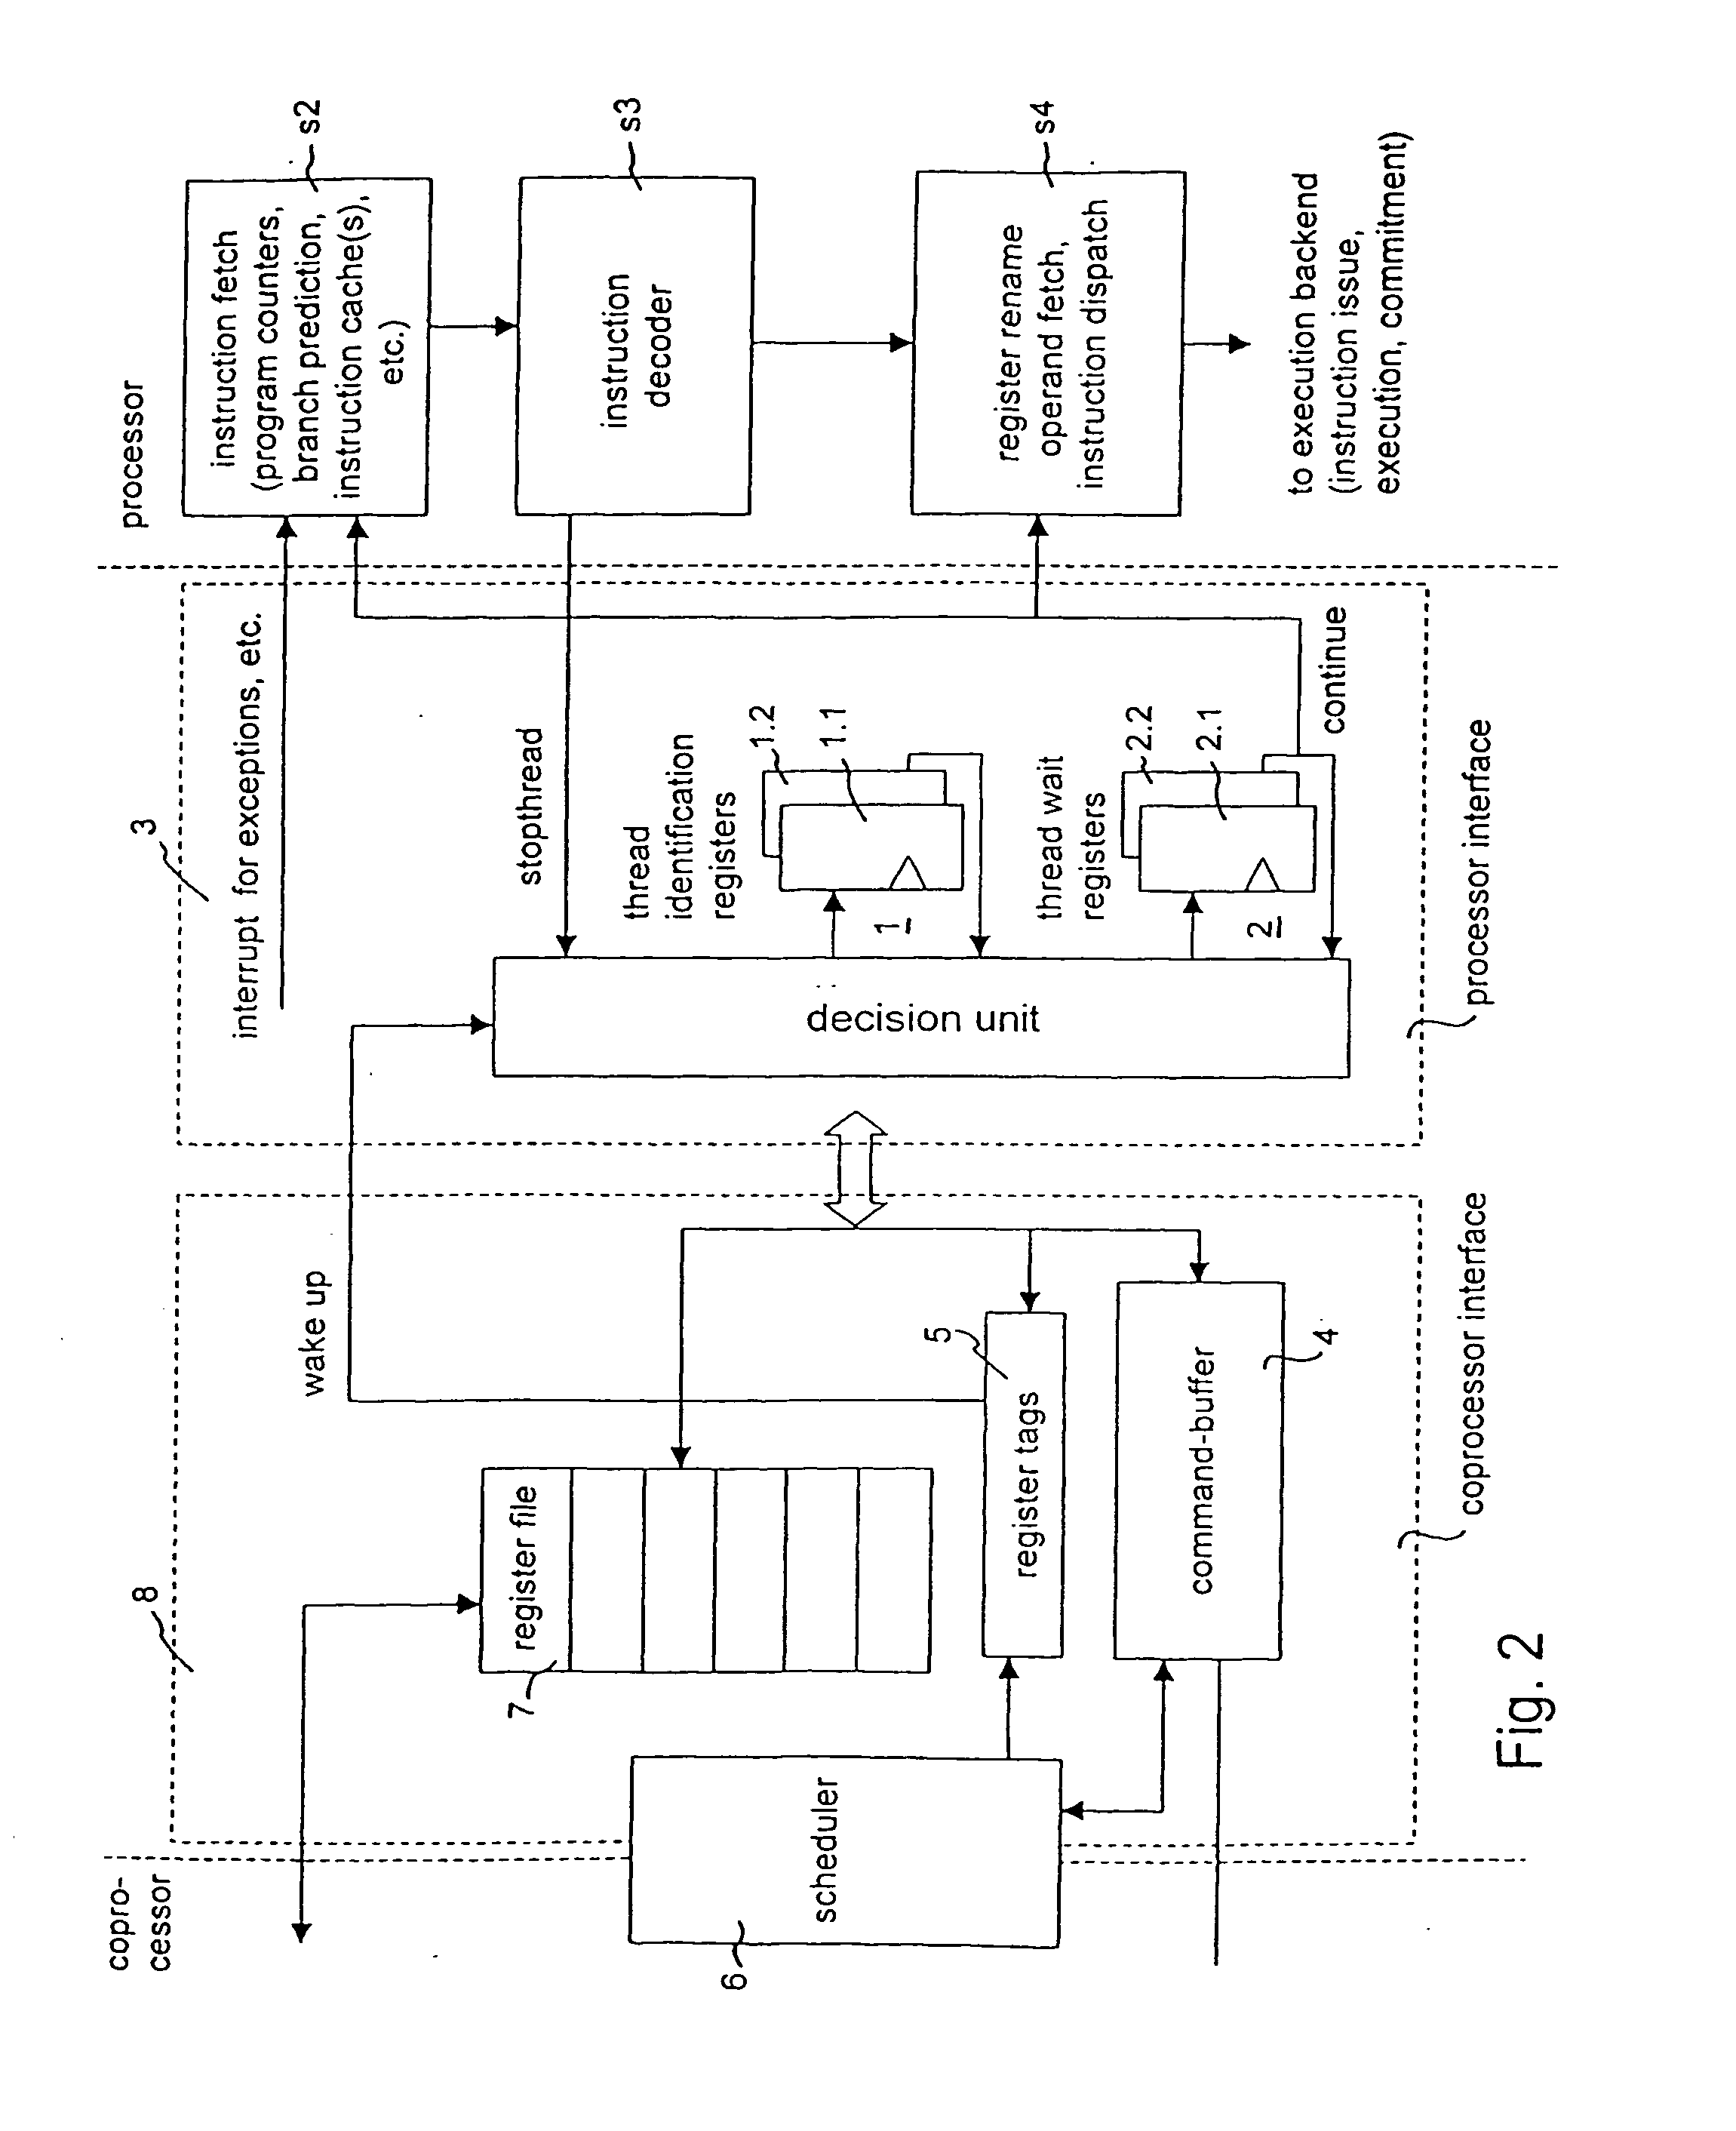 Method and device for synchronizing a processor and a coprocessor